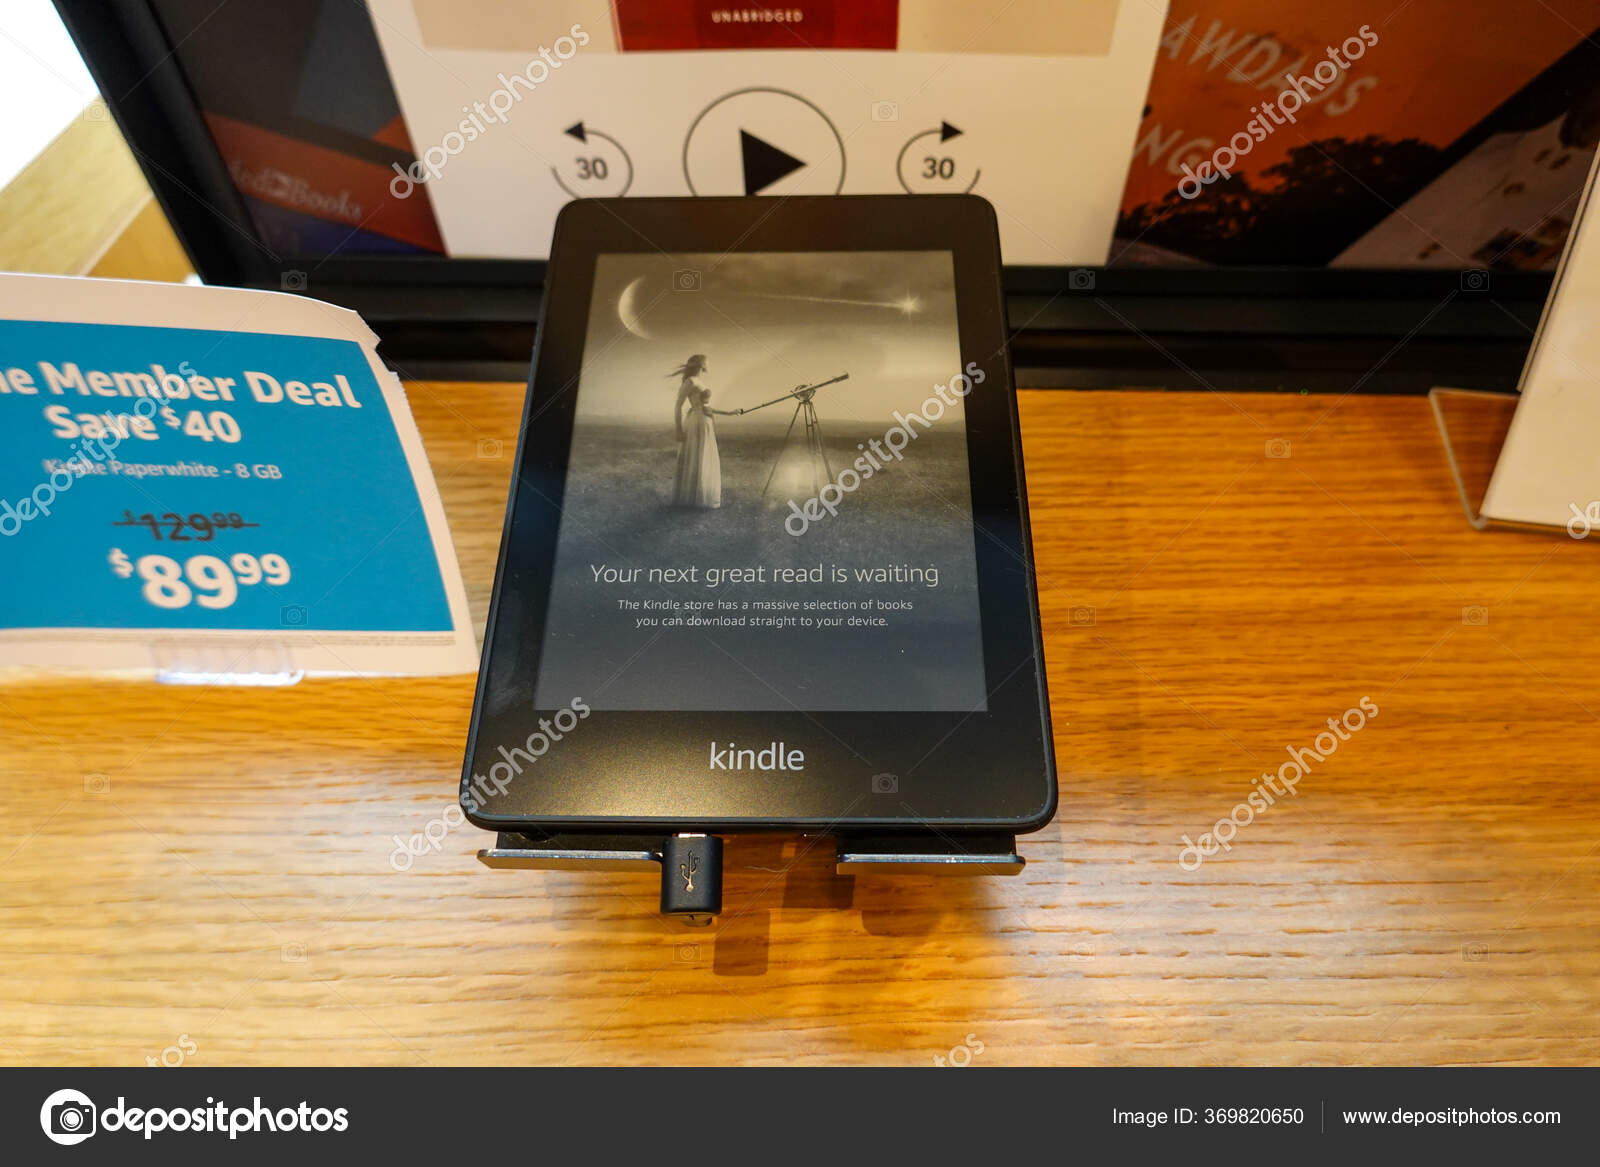 how to add a device to amazon kindle account